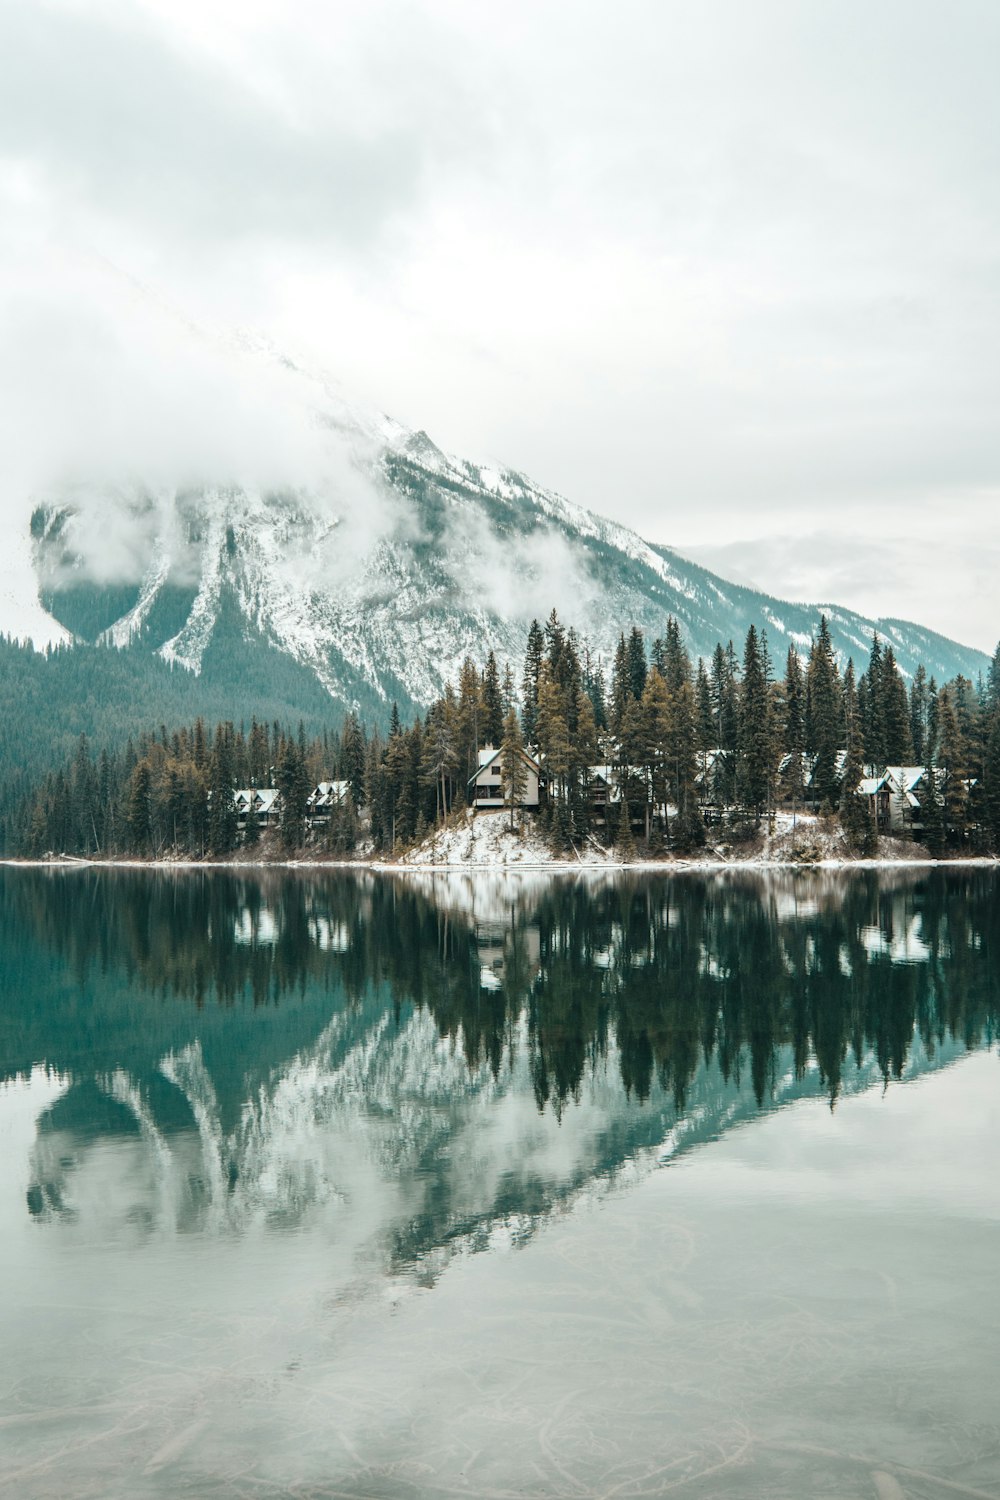 icy mountain and lake with pine trees